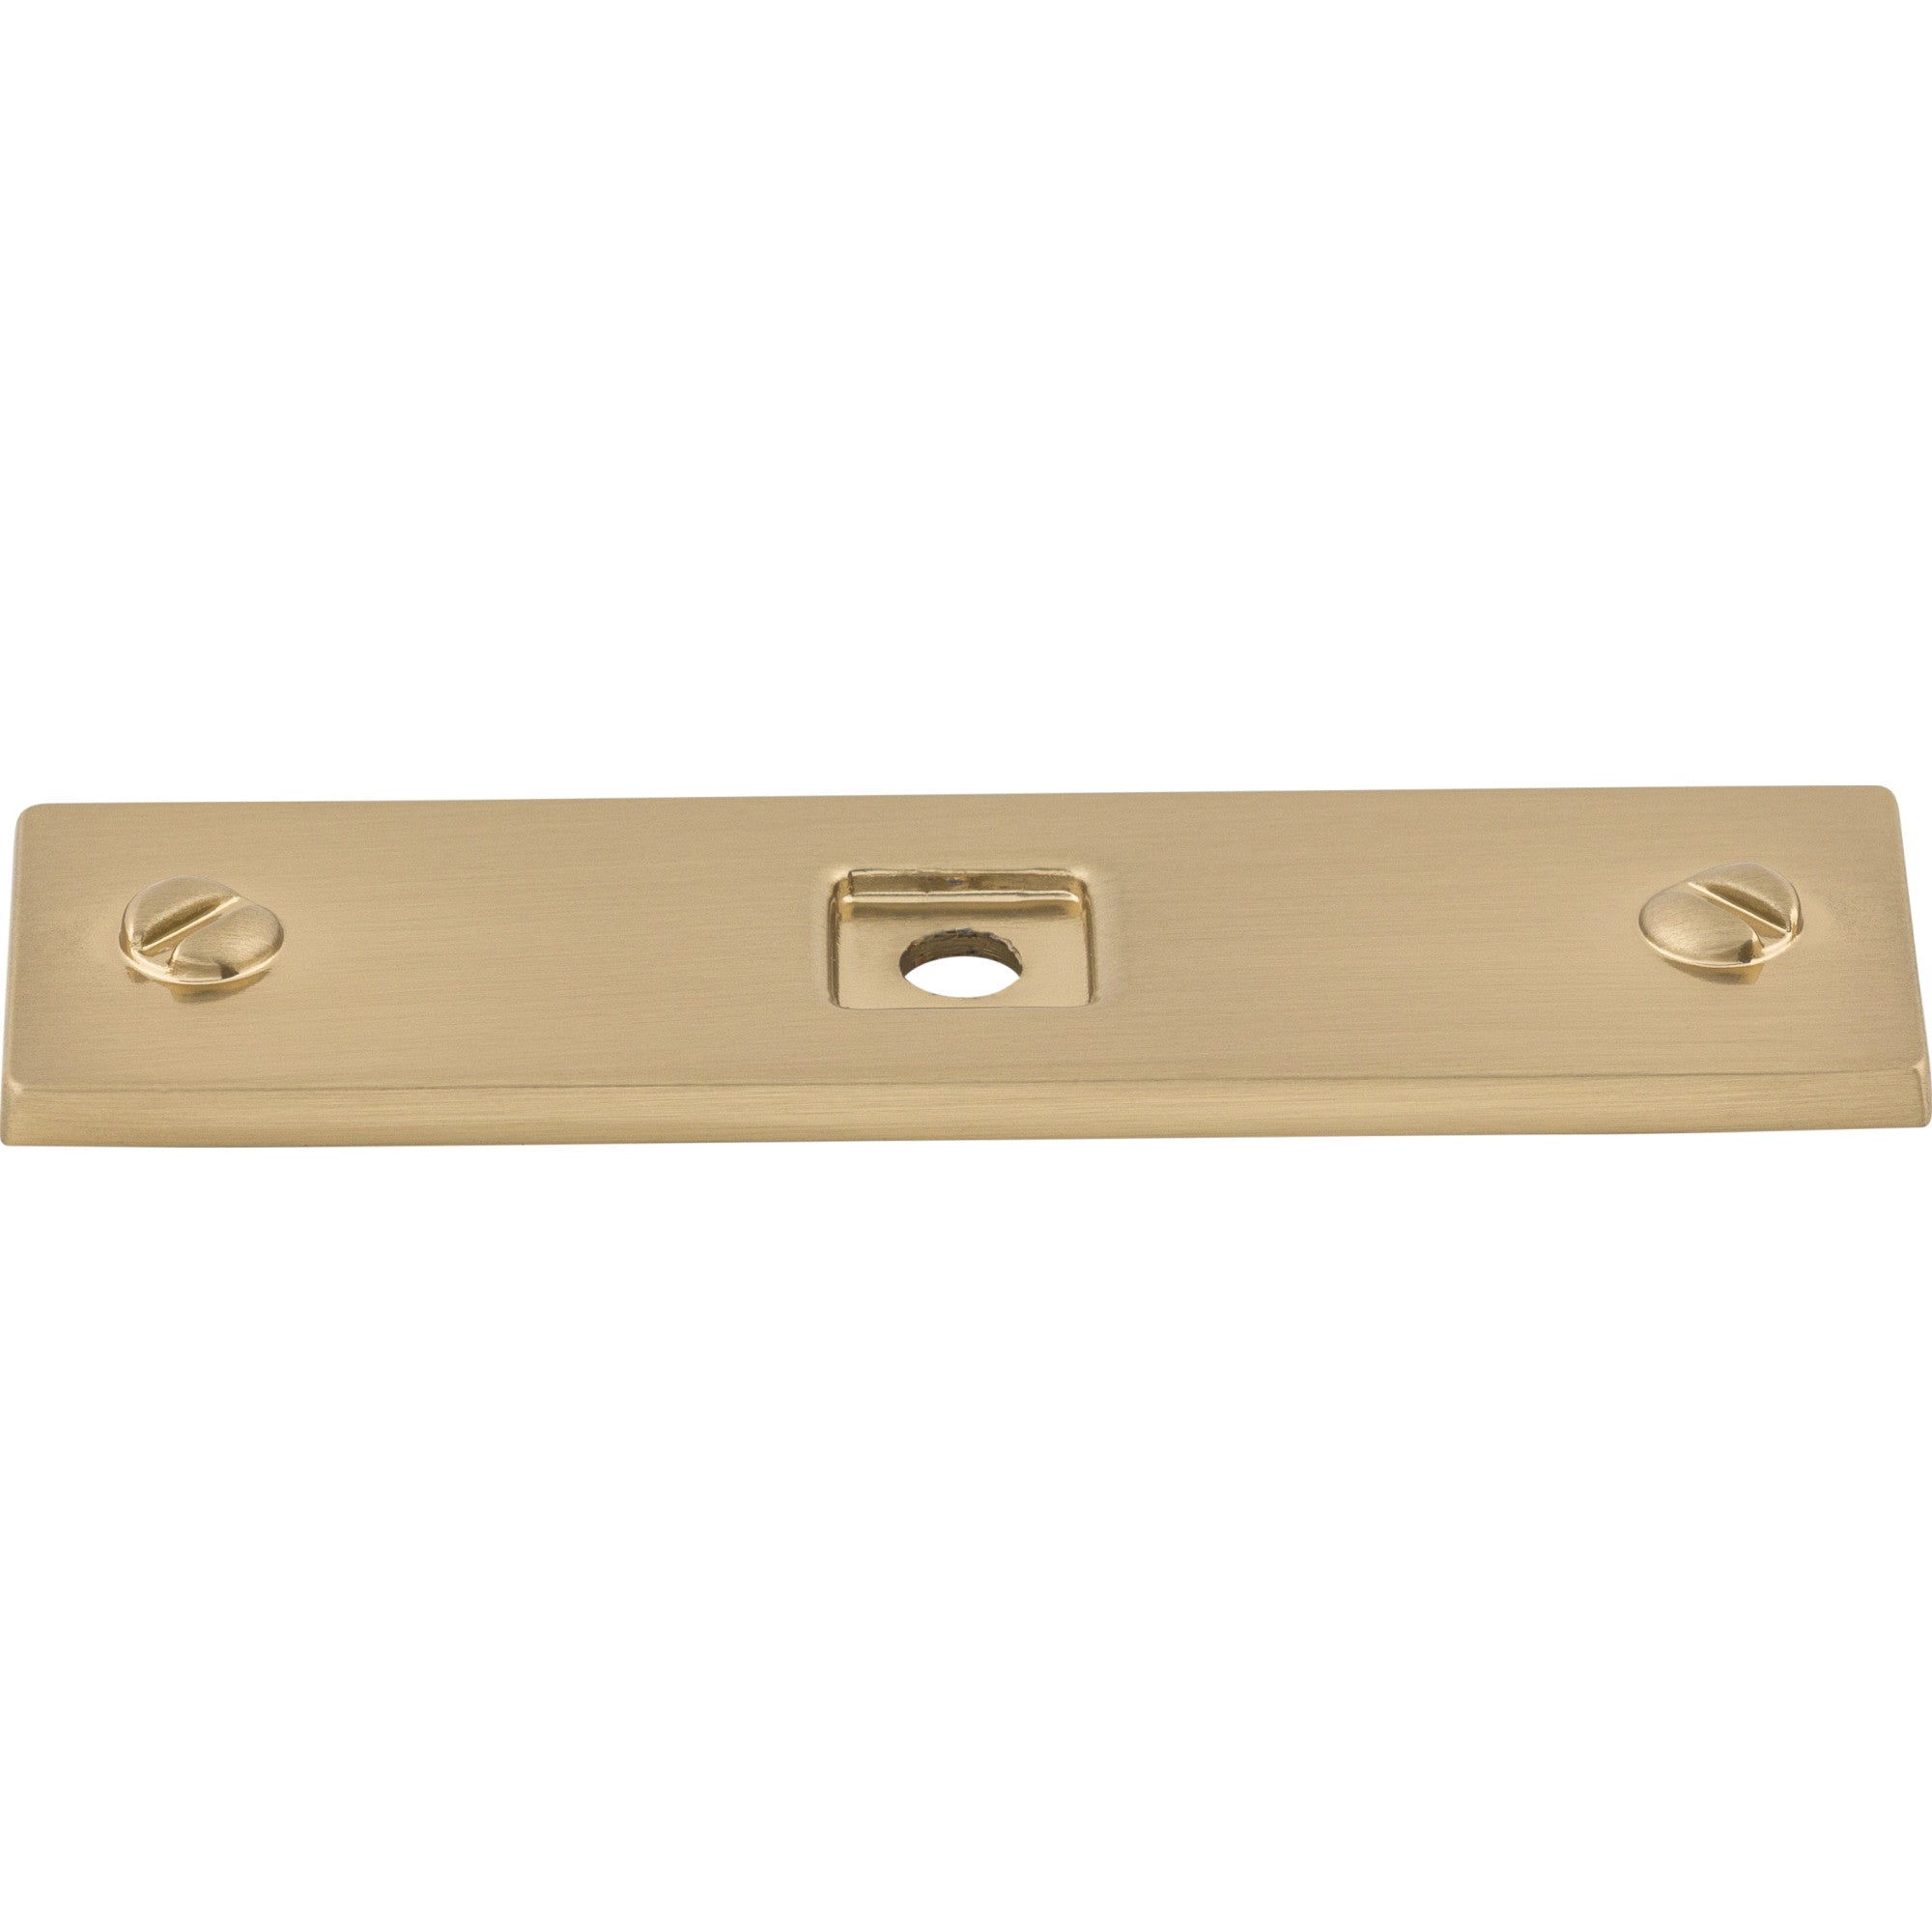 Top Knobs - Hardware - Channing Backplate - Polished Chrome - Union Lighting Luminaires Décor